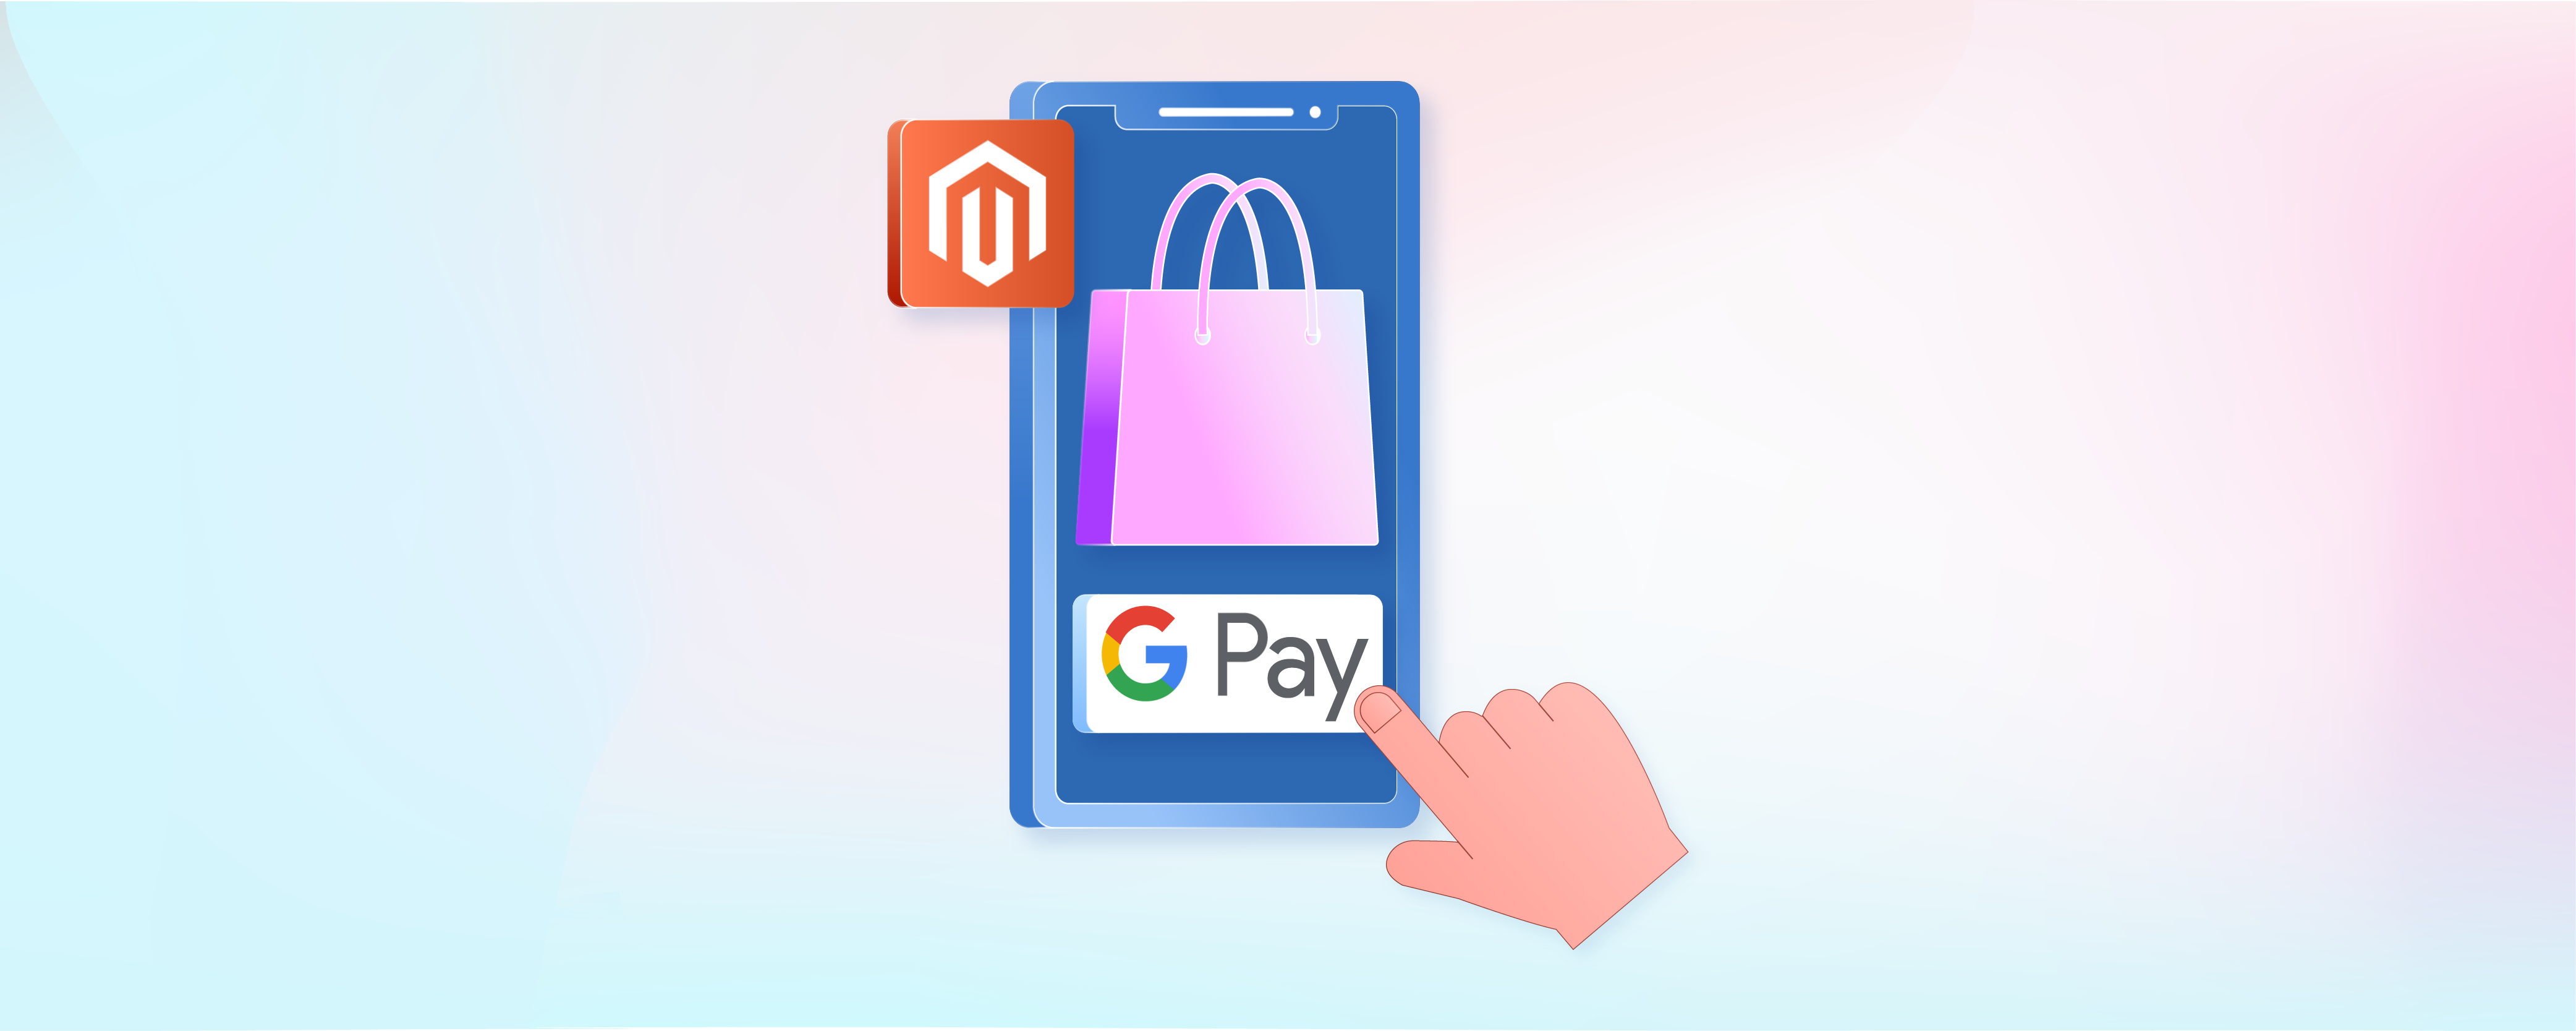 How to Configure Google Pay in Magento 2?